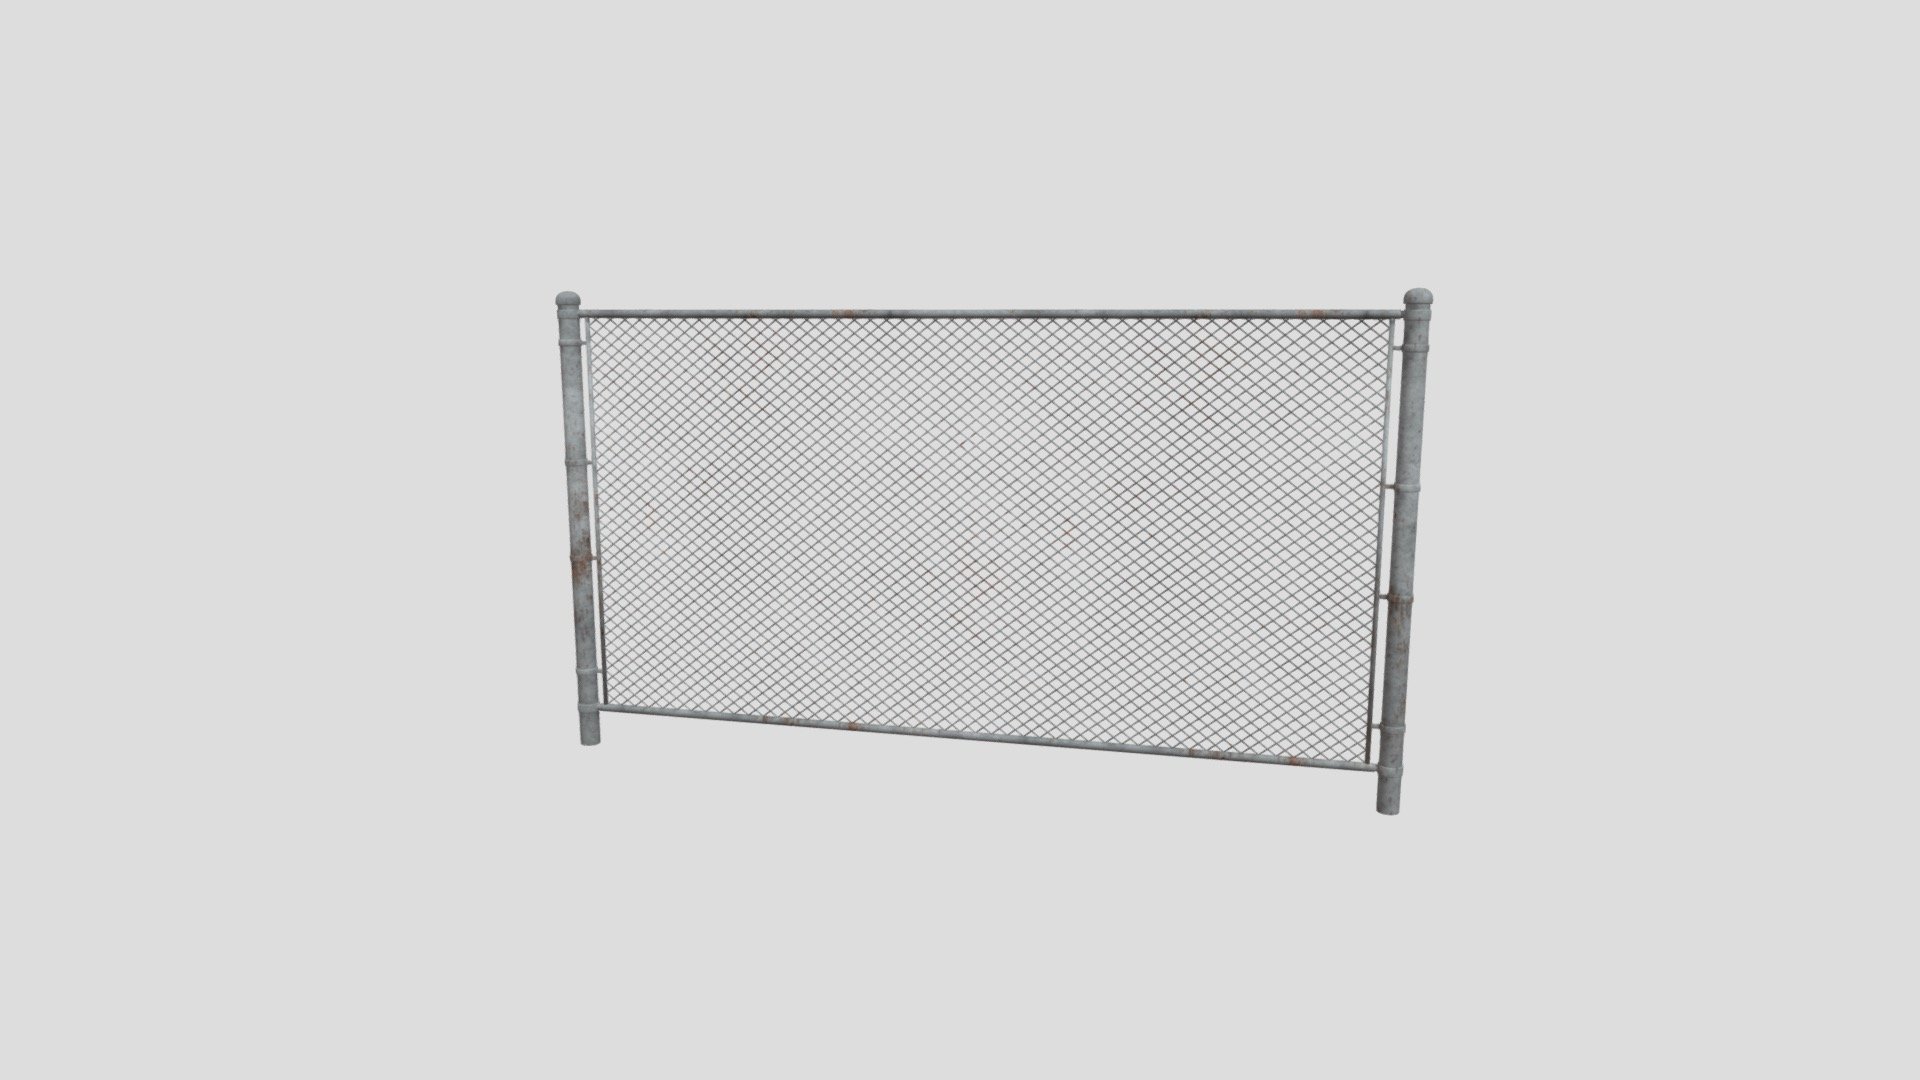 Textures: 2048 x 2048, Two colors on texture: orange and grey colors.

Has Normal Map: 2048 x 2048.

Materials: 1 - Chain Link Fence

Smooth and flat shaded.

Mirrored.

Subdivision Level: 0

Origin located on bottom-center.

Polygons: 60696

Vertices: 24244

Formats: Fbx

I hope you enjoy the model! - Chain Link Fence - Buy Royalty Free 3D model by Ed+ (@EDplus) 3d model